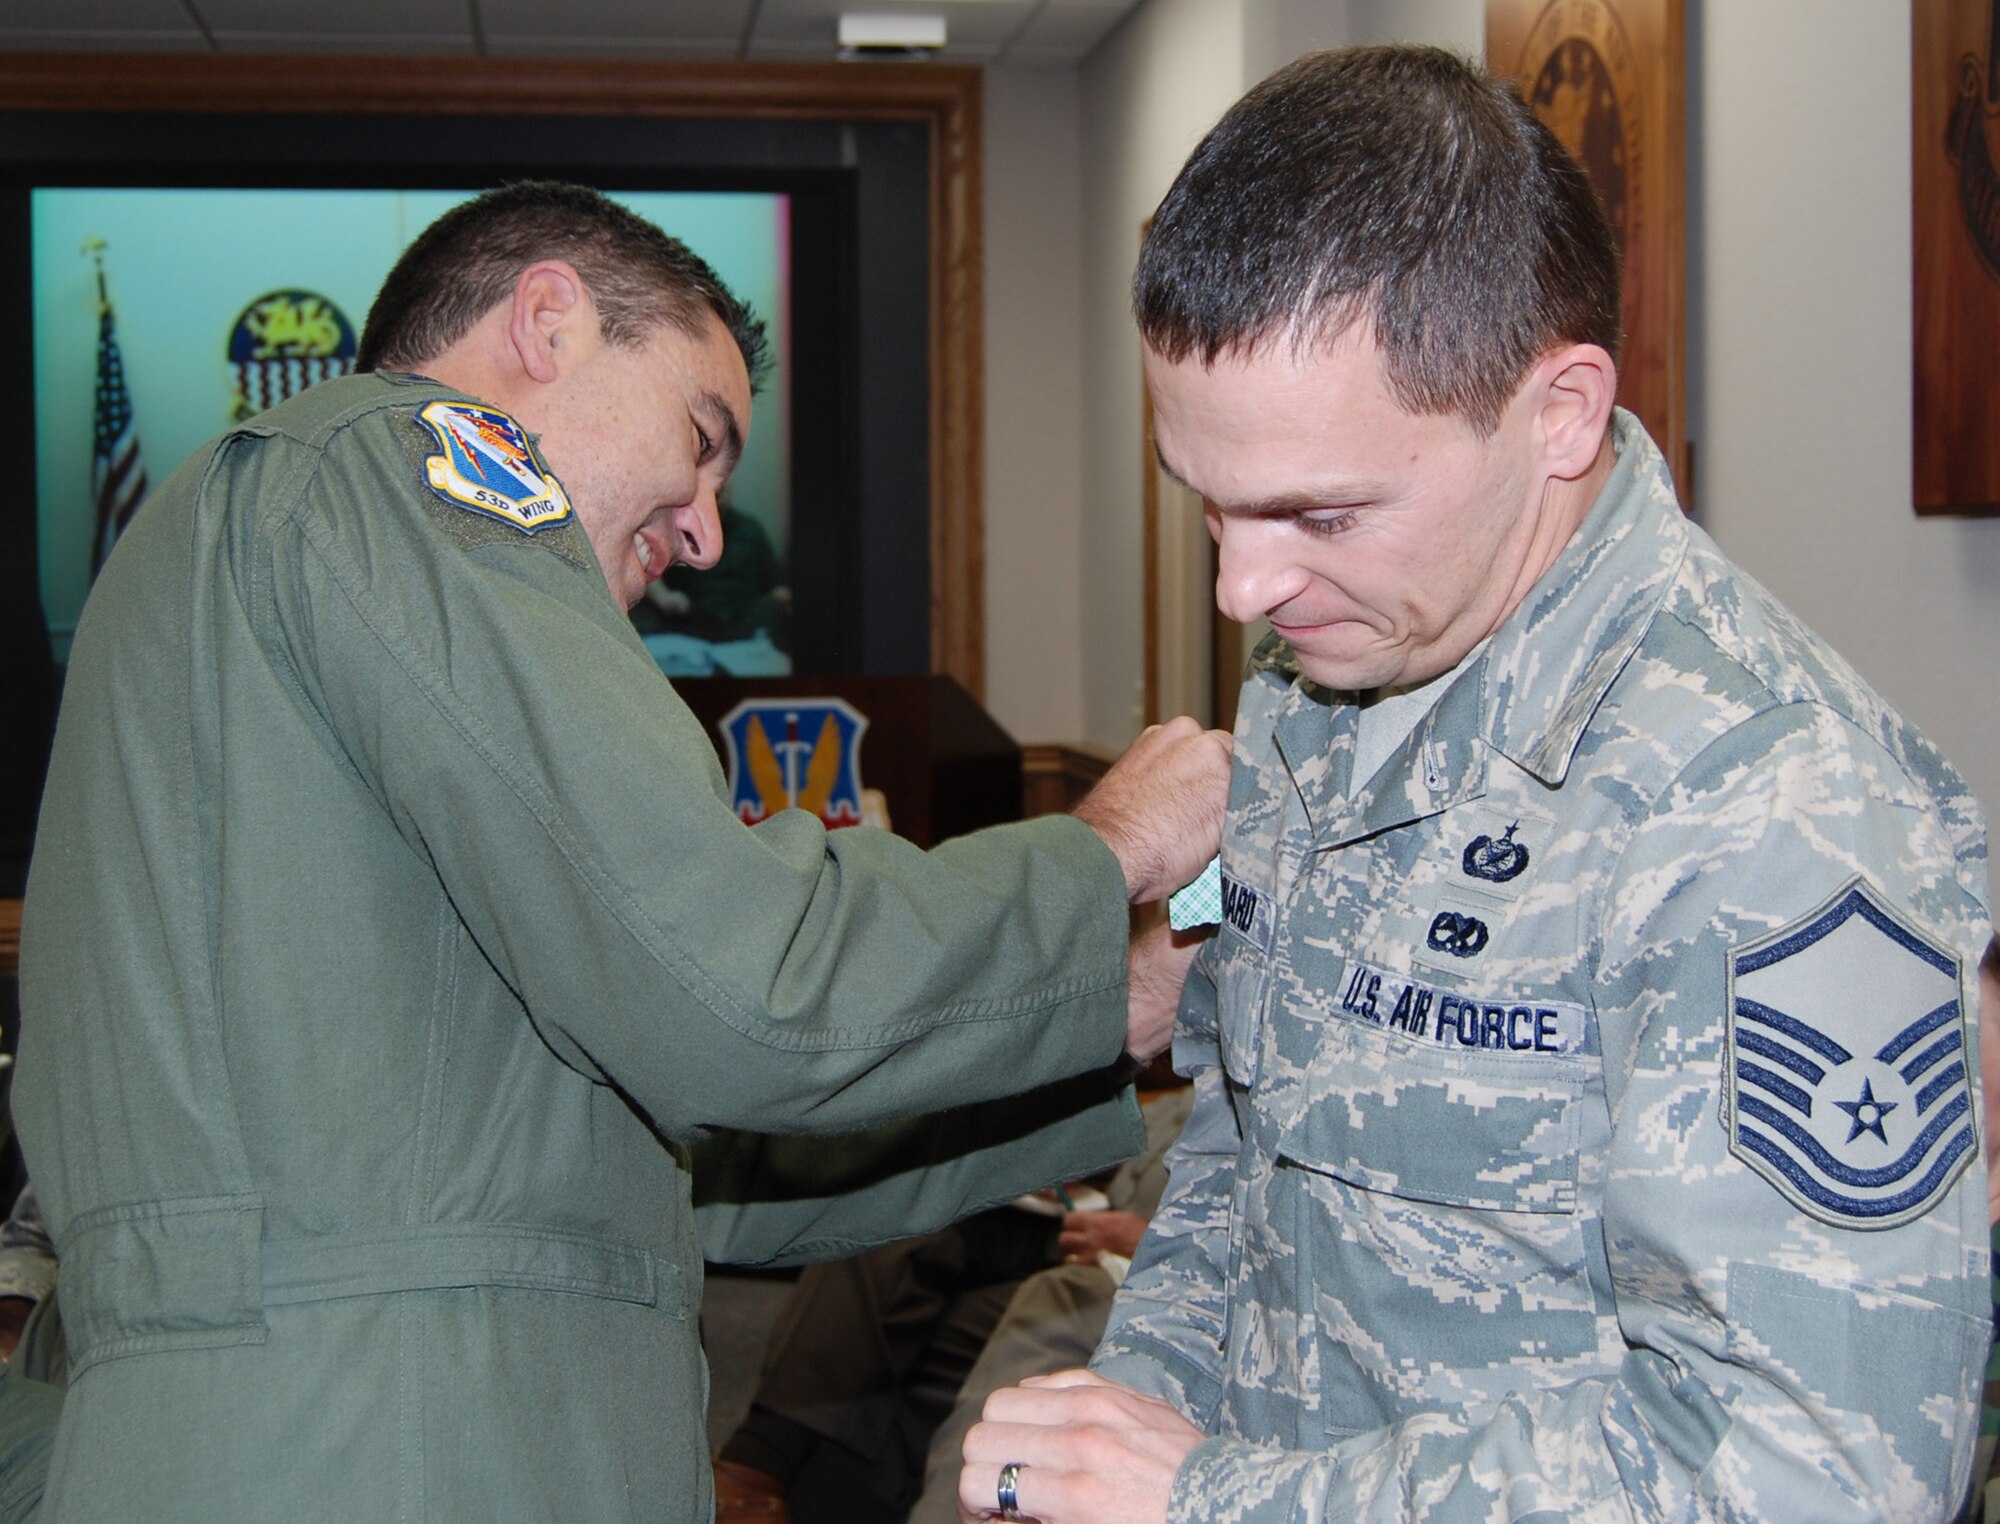 Newly promoted "Master" Sgt. Andrew Leonhard, 53d Wing public affairs, gets his stripes put on by Col. Mick Guthals, 53d Wing vice commander, at a staff meeting Jan. 14 at Eglin Air Force Base.  The new senior NCO was promoted via the Stripes for Exceptional Performers program.  Air Force photo by Capt. Carrie Kessler.